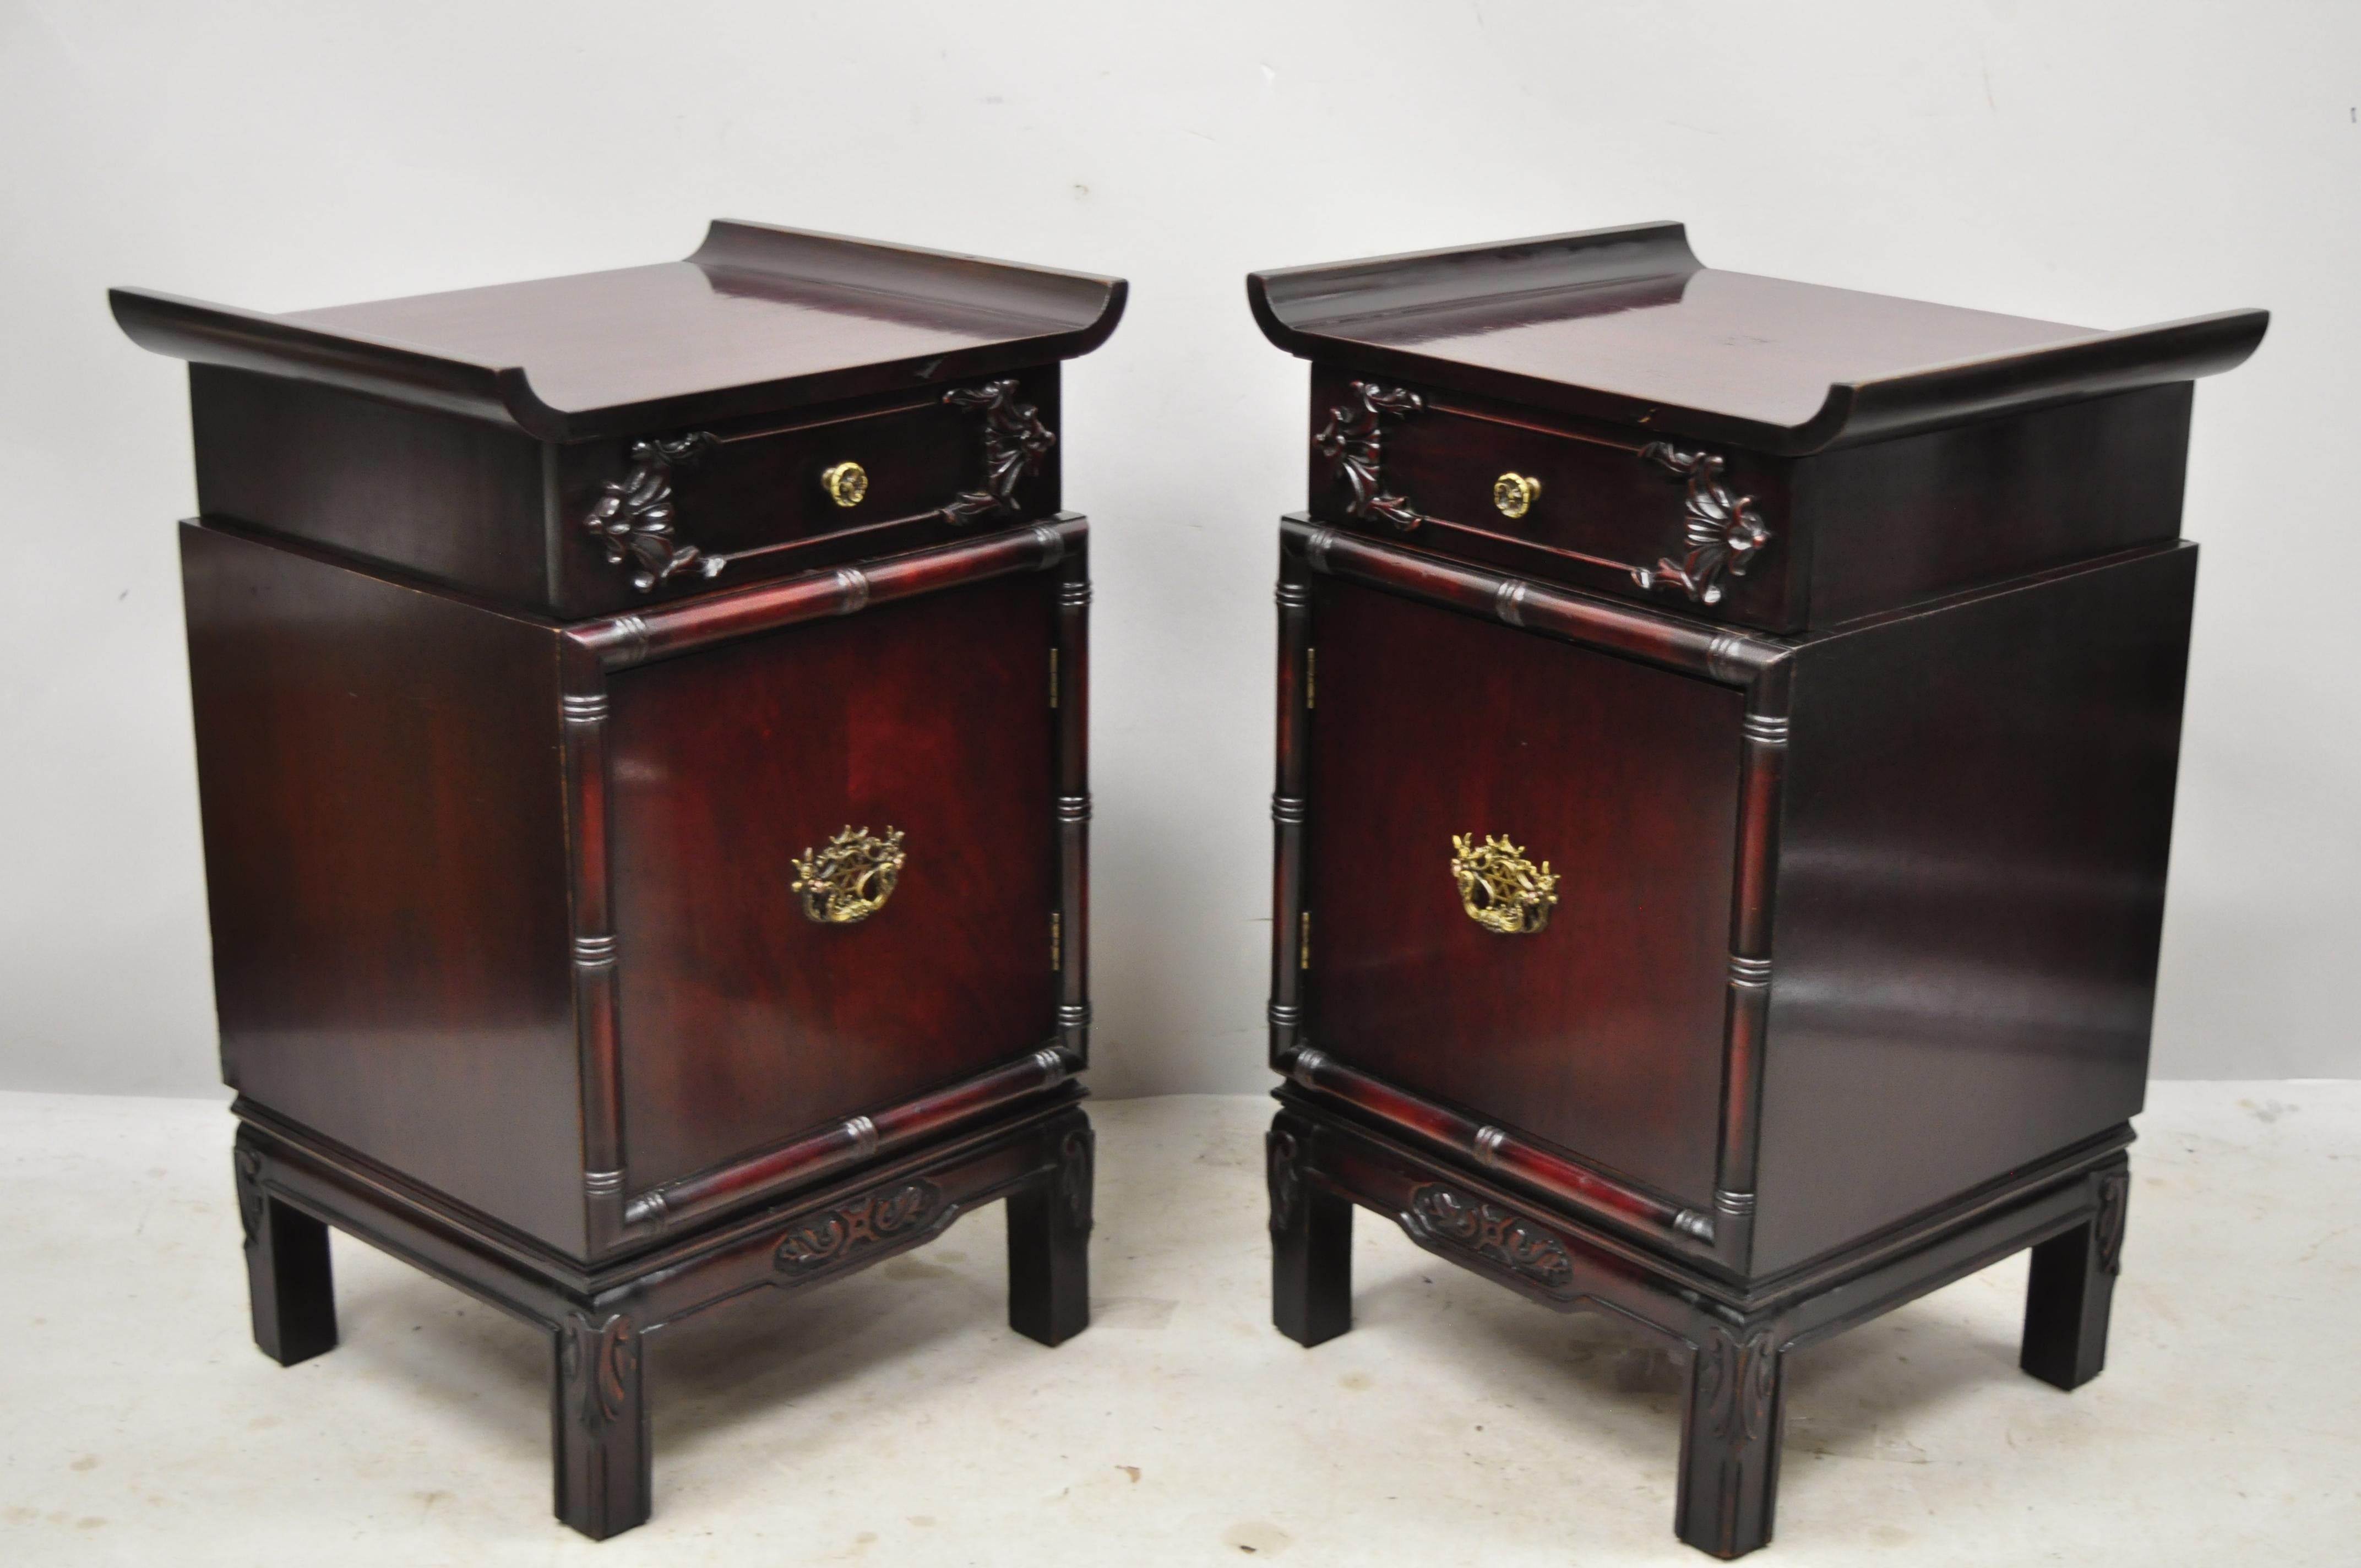 Vintage Chinese Chippendale pagoda top mahogany faux bamboo nightstands - a pair. Item features faux bamboo carved details, pagoda top, beautiful wood grain, 1 swing door, 1 drawer, solid brass hardware, great style and form, Circa early to mid